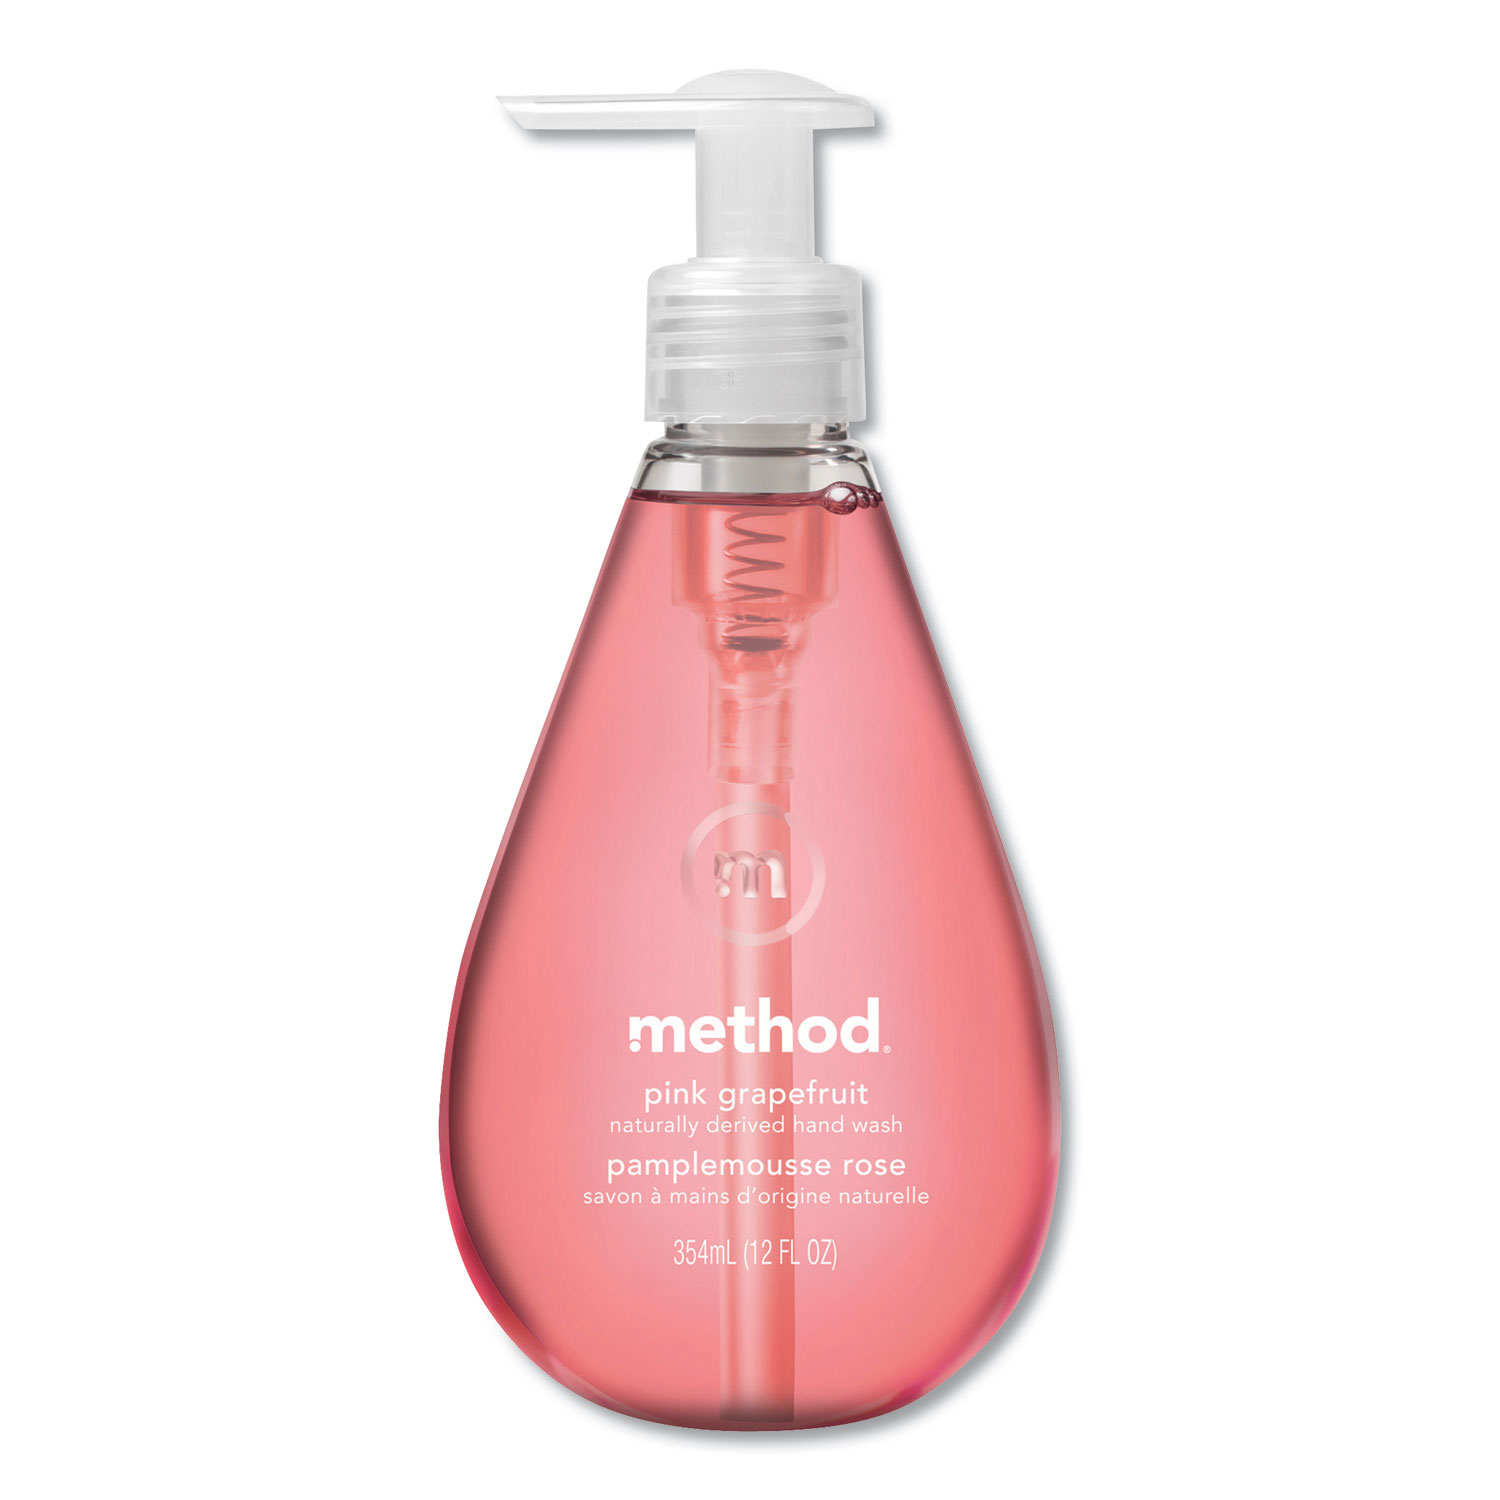 Method jel Hand Soap, Sea Minerals, 12 Ounce - image 3 of 3